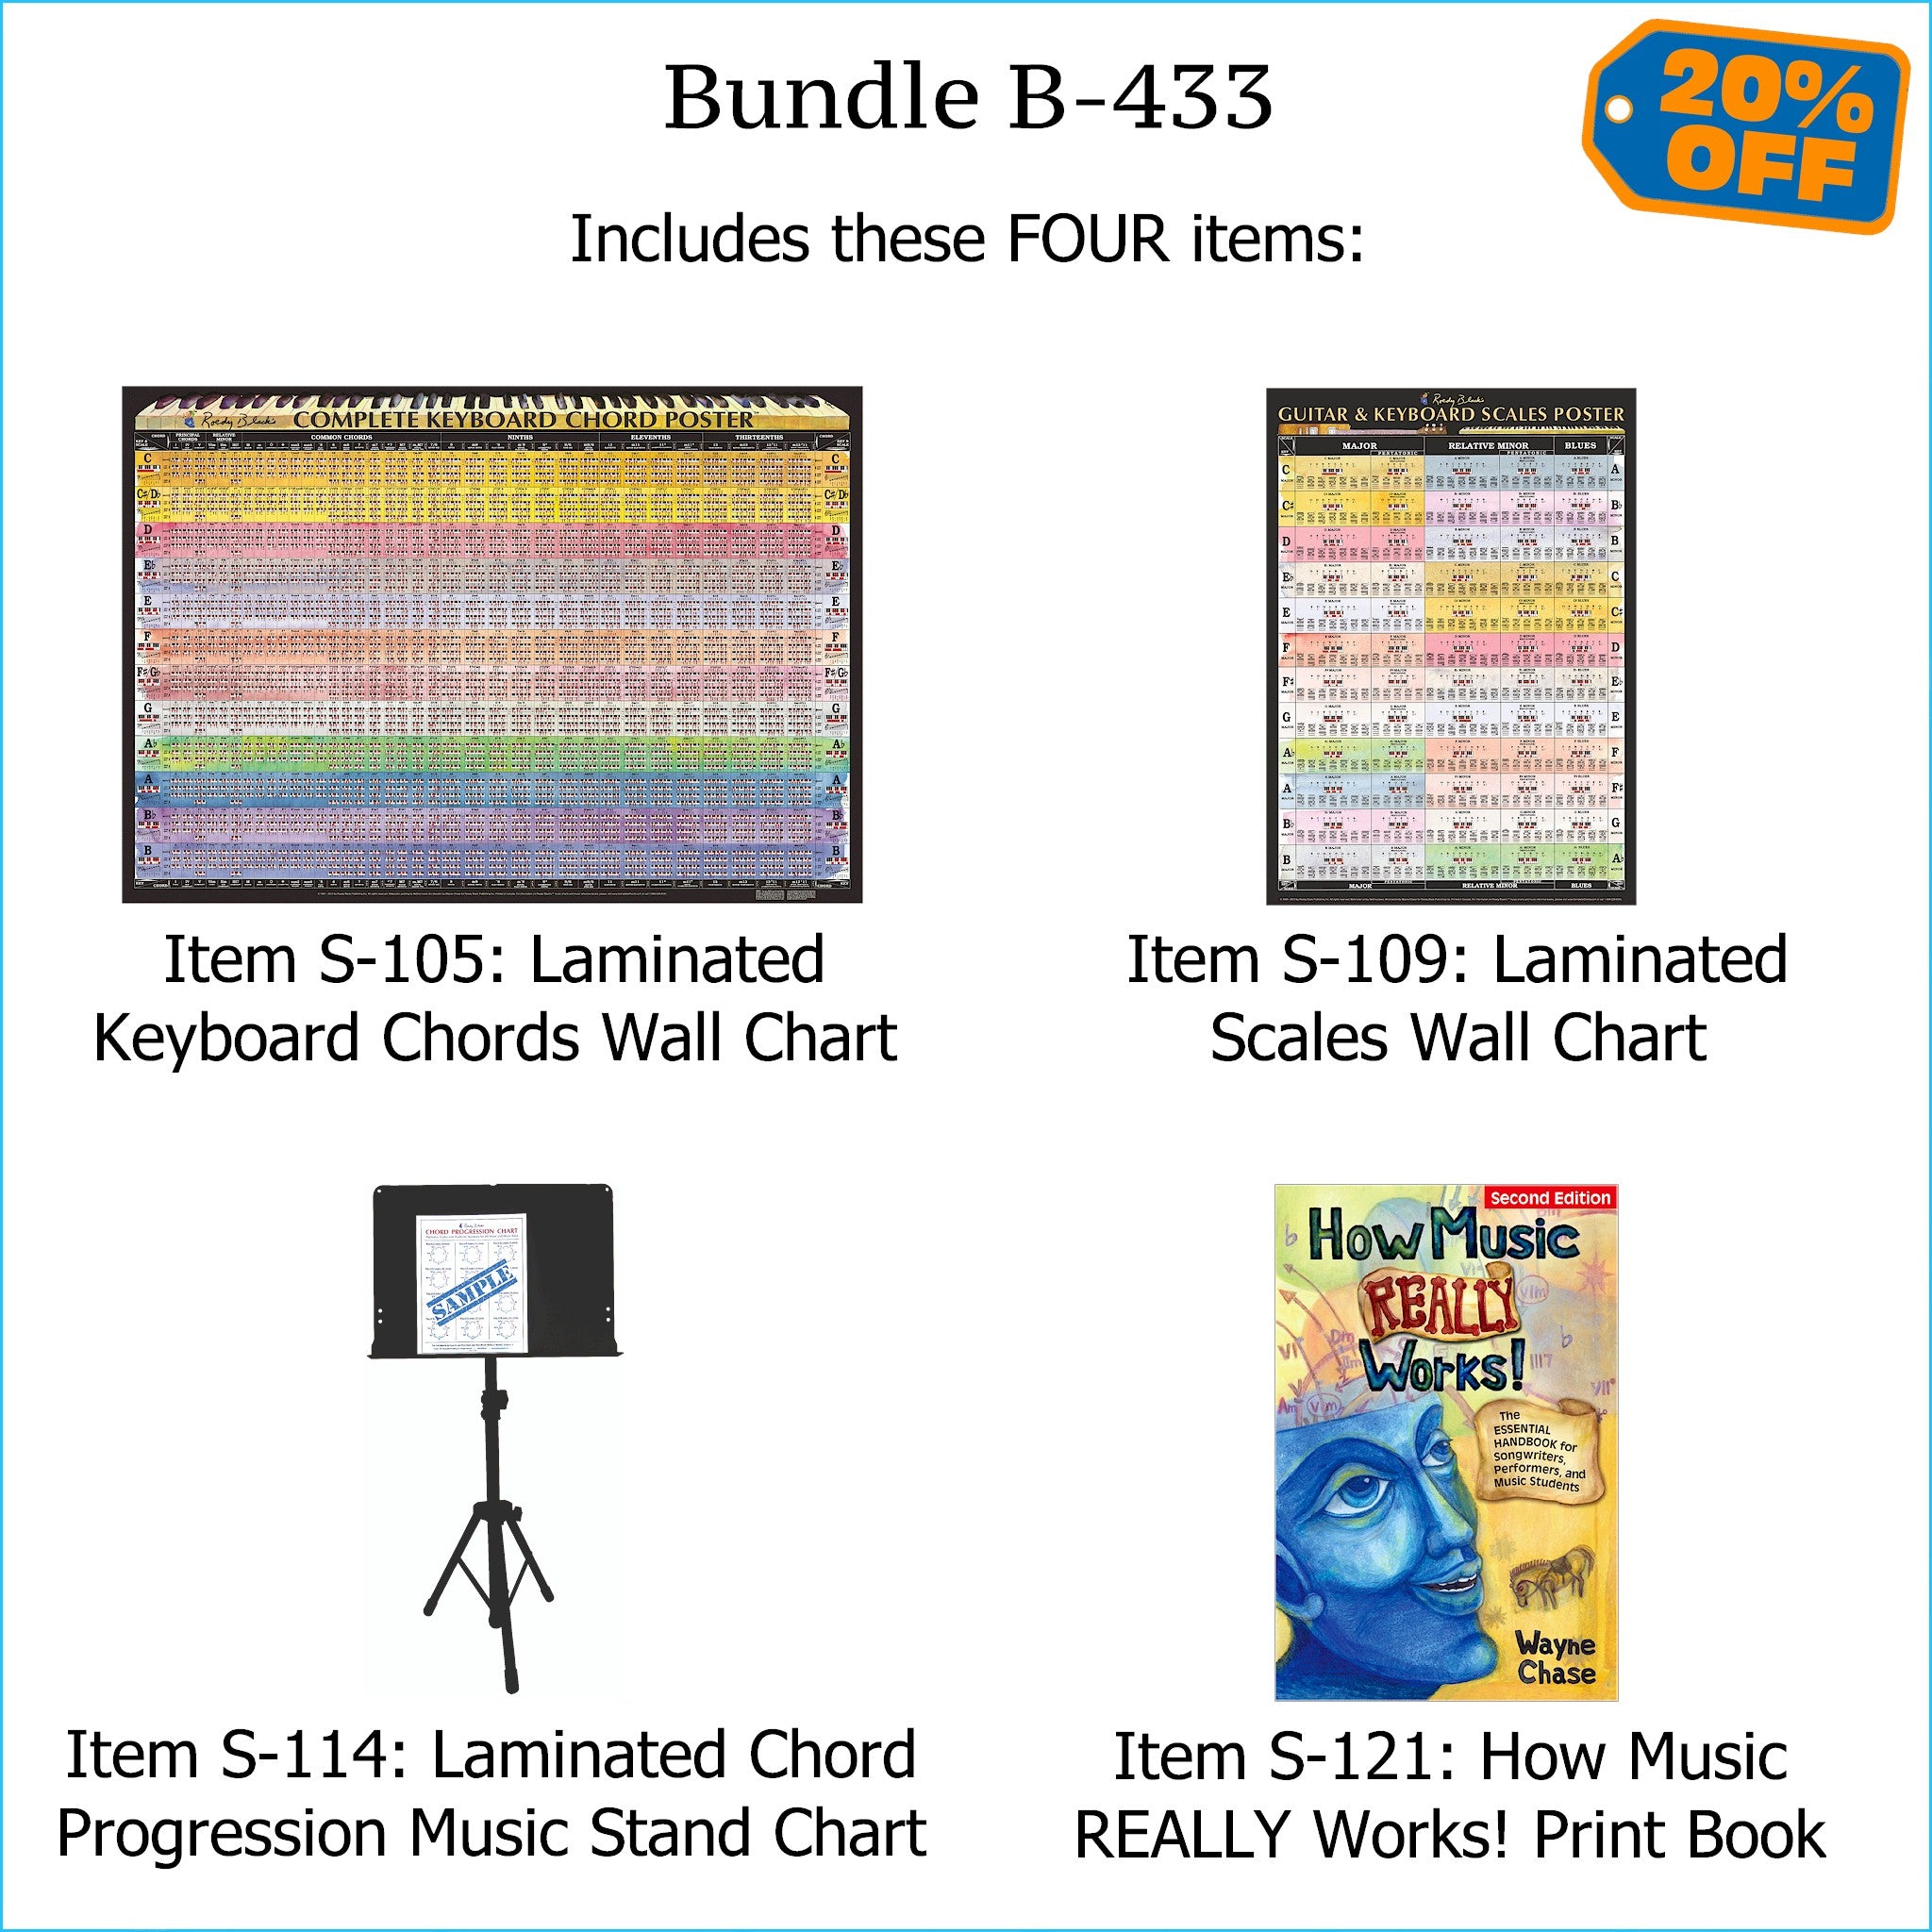 Bundle B-433: "How Music REALLY Works!, 2nd Edition" Print Book + TWO Laminated Wall Posters: Complete Keyboard Chords & Scales. FREE SHIPPING – USA & Canada.